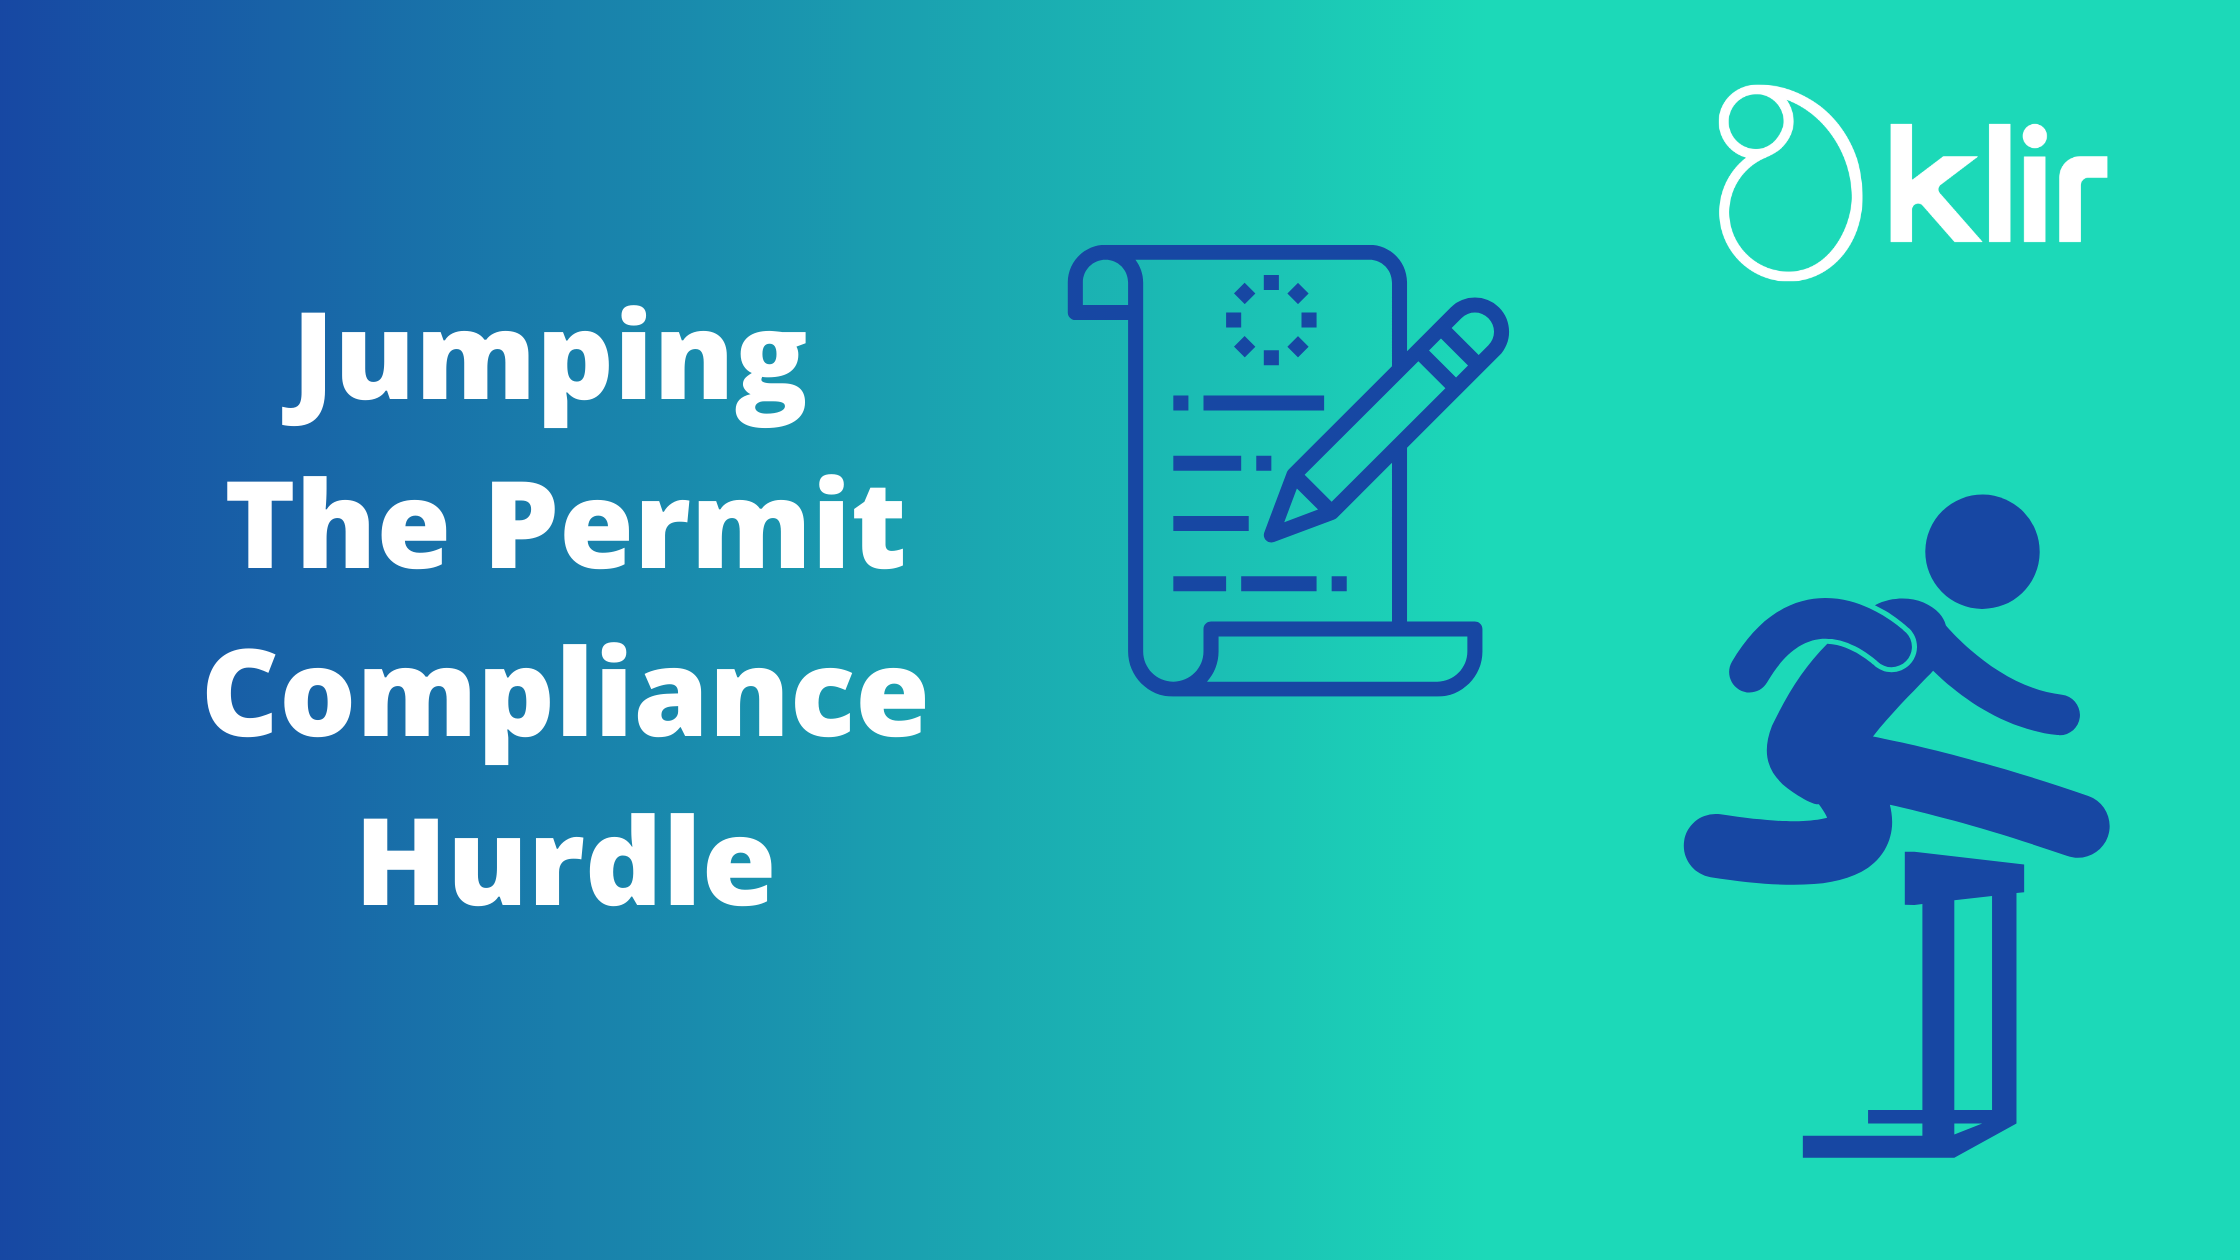 Jumping The Permit Compliance Hurdle